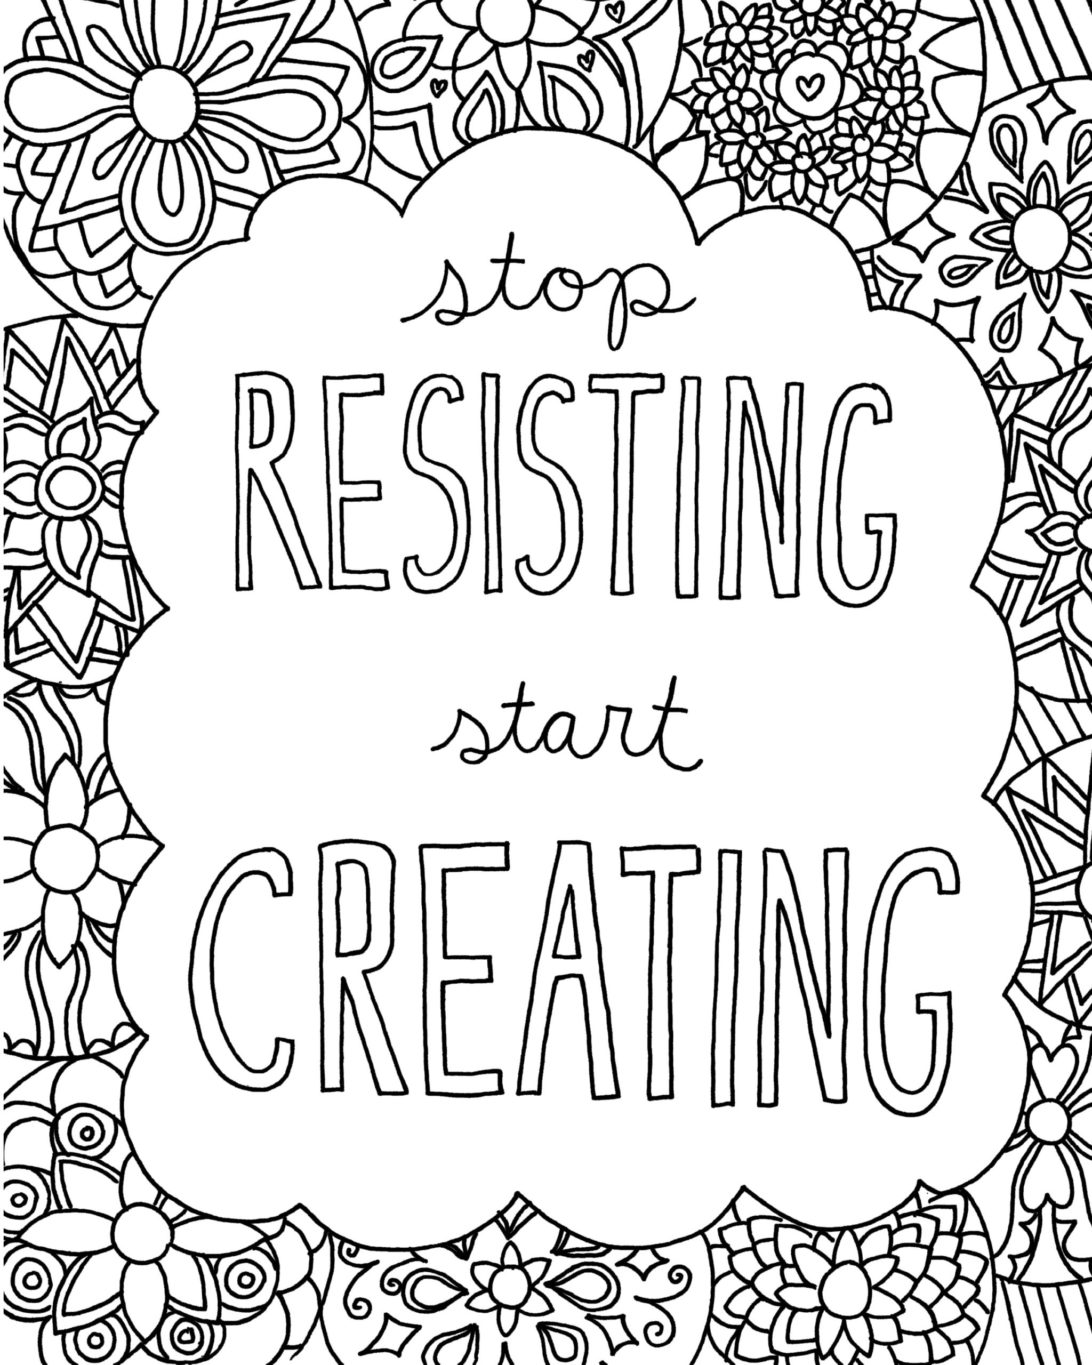 Stop Resisting Start Creating Coloring Page